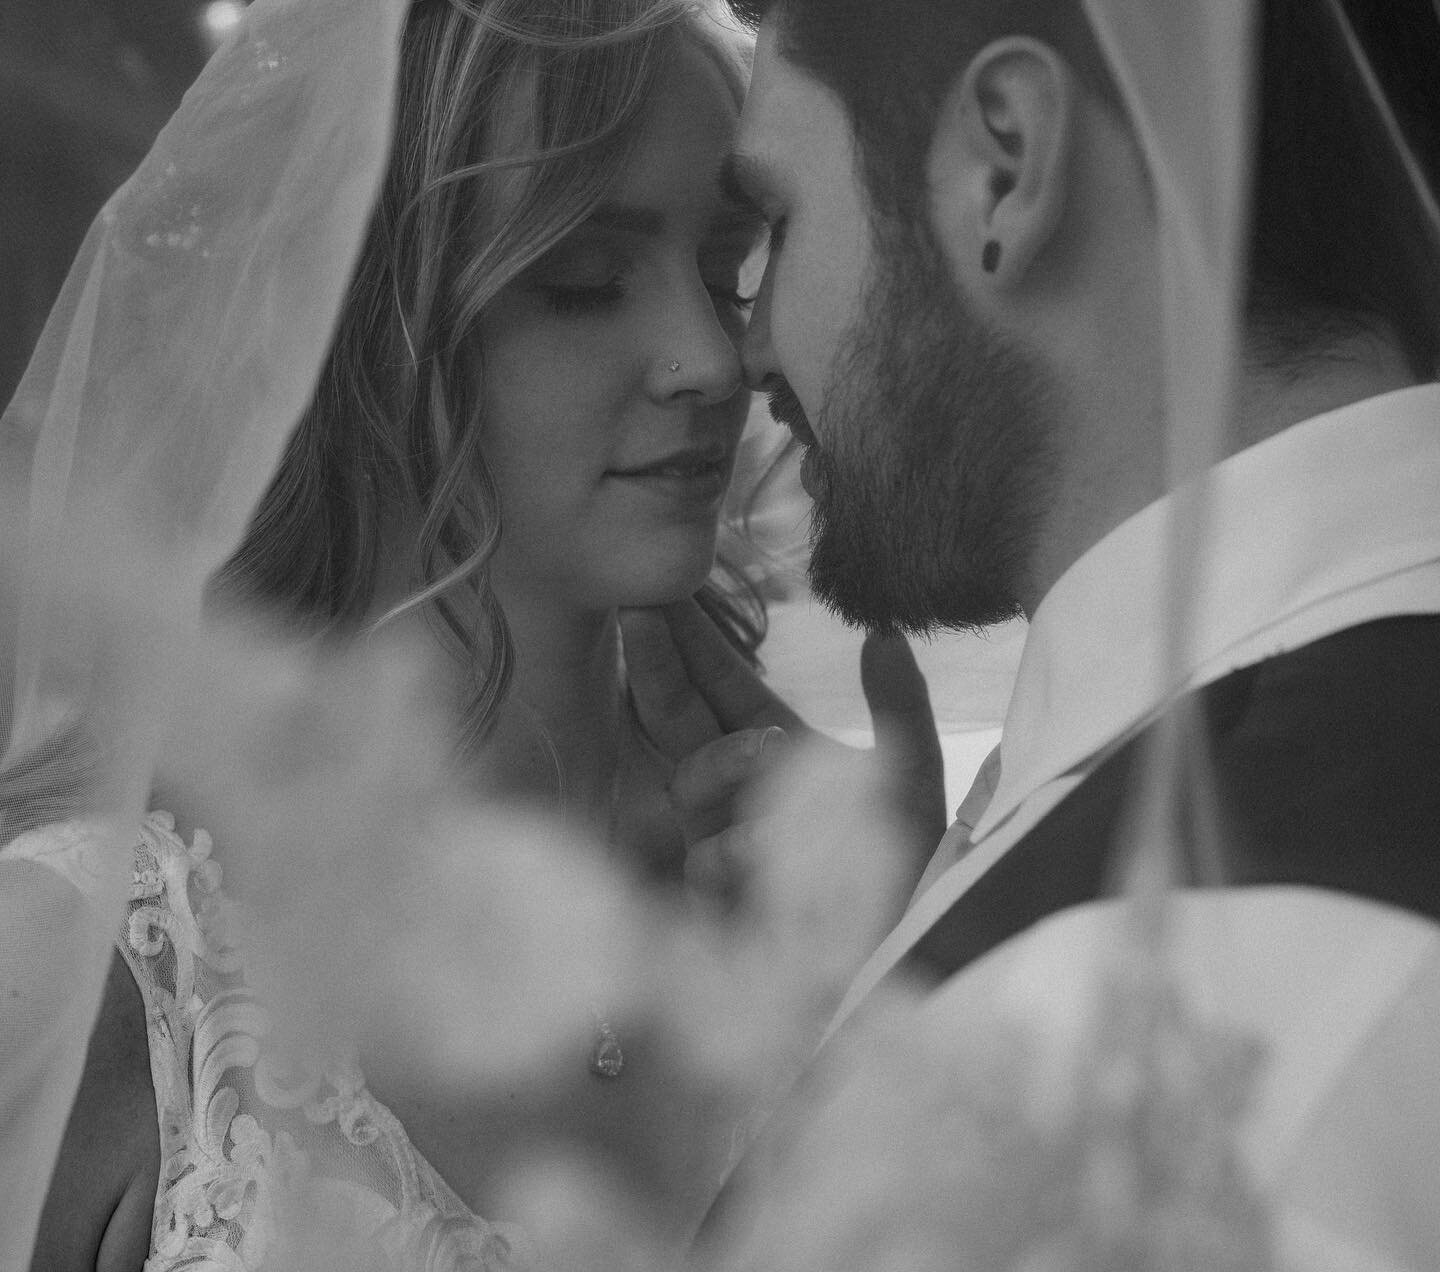 Story telling in black and white. 

This day was magical. Josh and T&eacute;a tied the knot on Saturday surrounded by their wonderful family and friends. 

They prioritized private time twice throughout the day. The first was 10 minutes to themselves